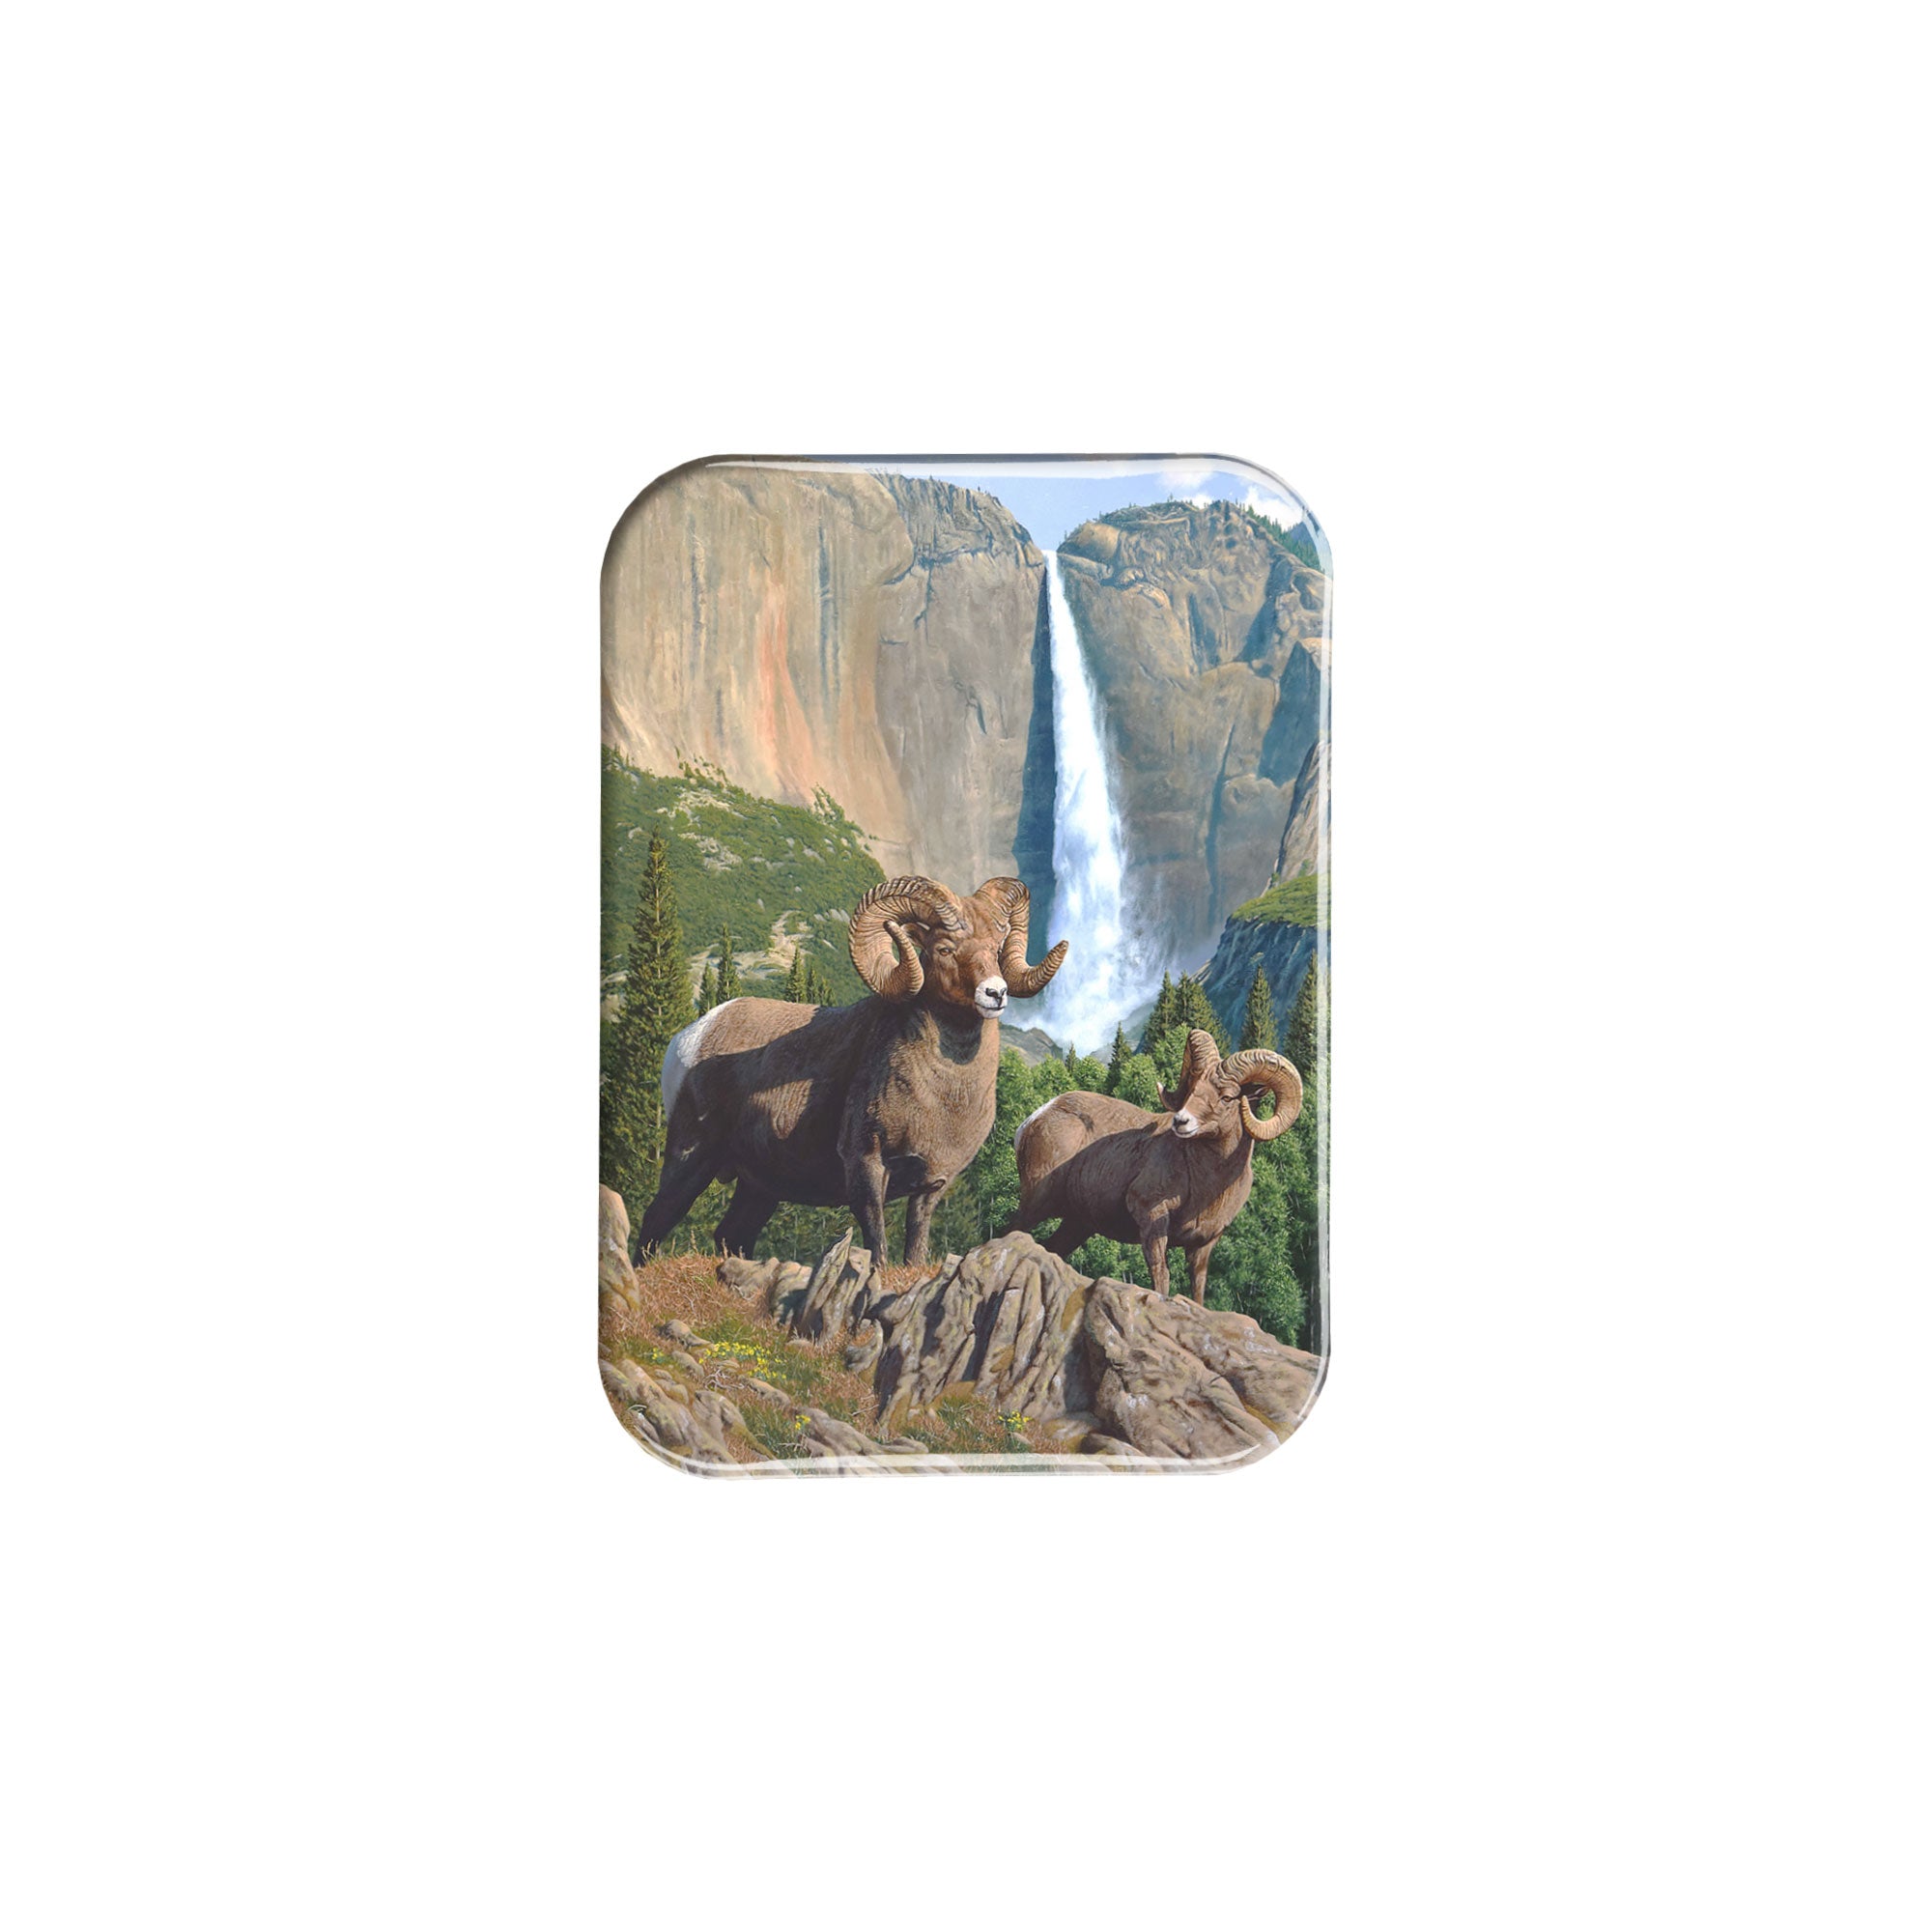 "Heights of Summer" - 2.5" X 3.5" Rectangle Fridge Magnets